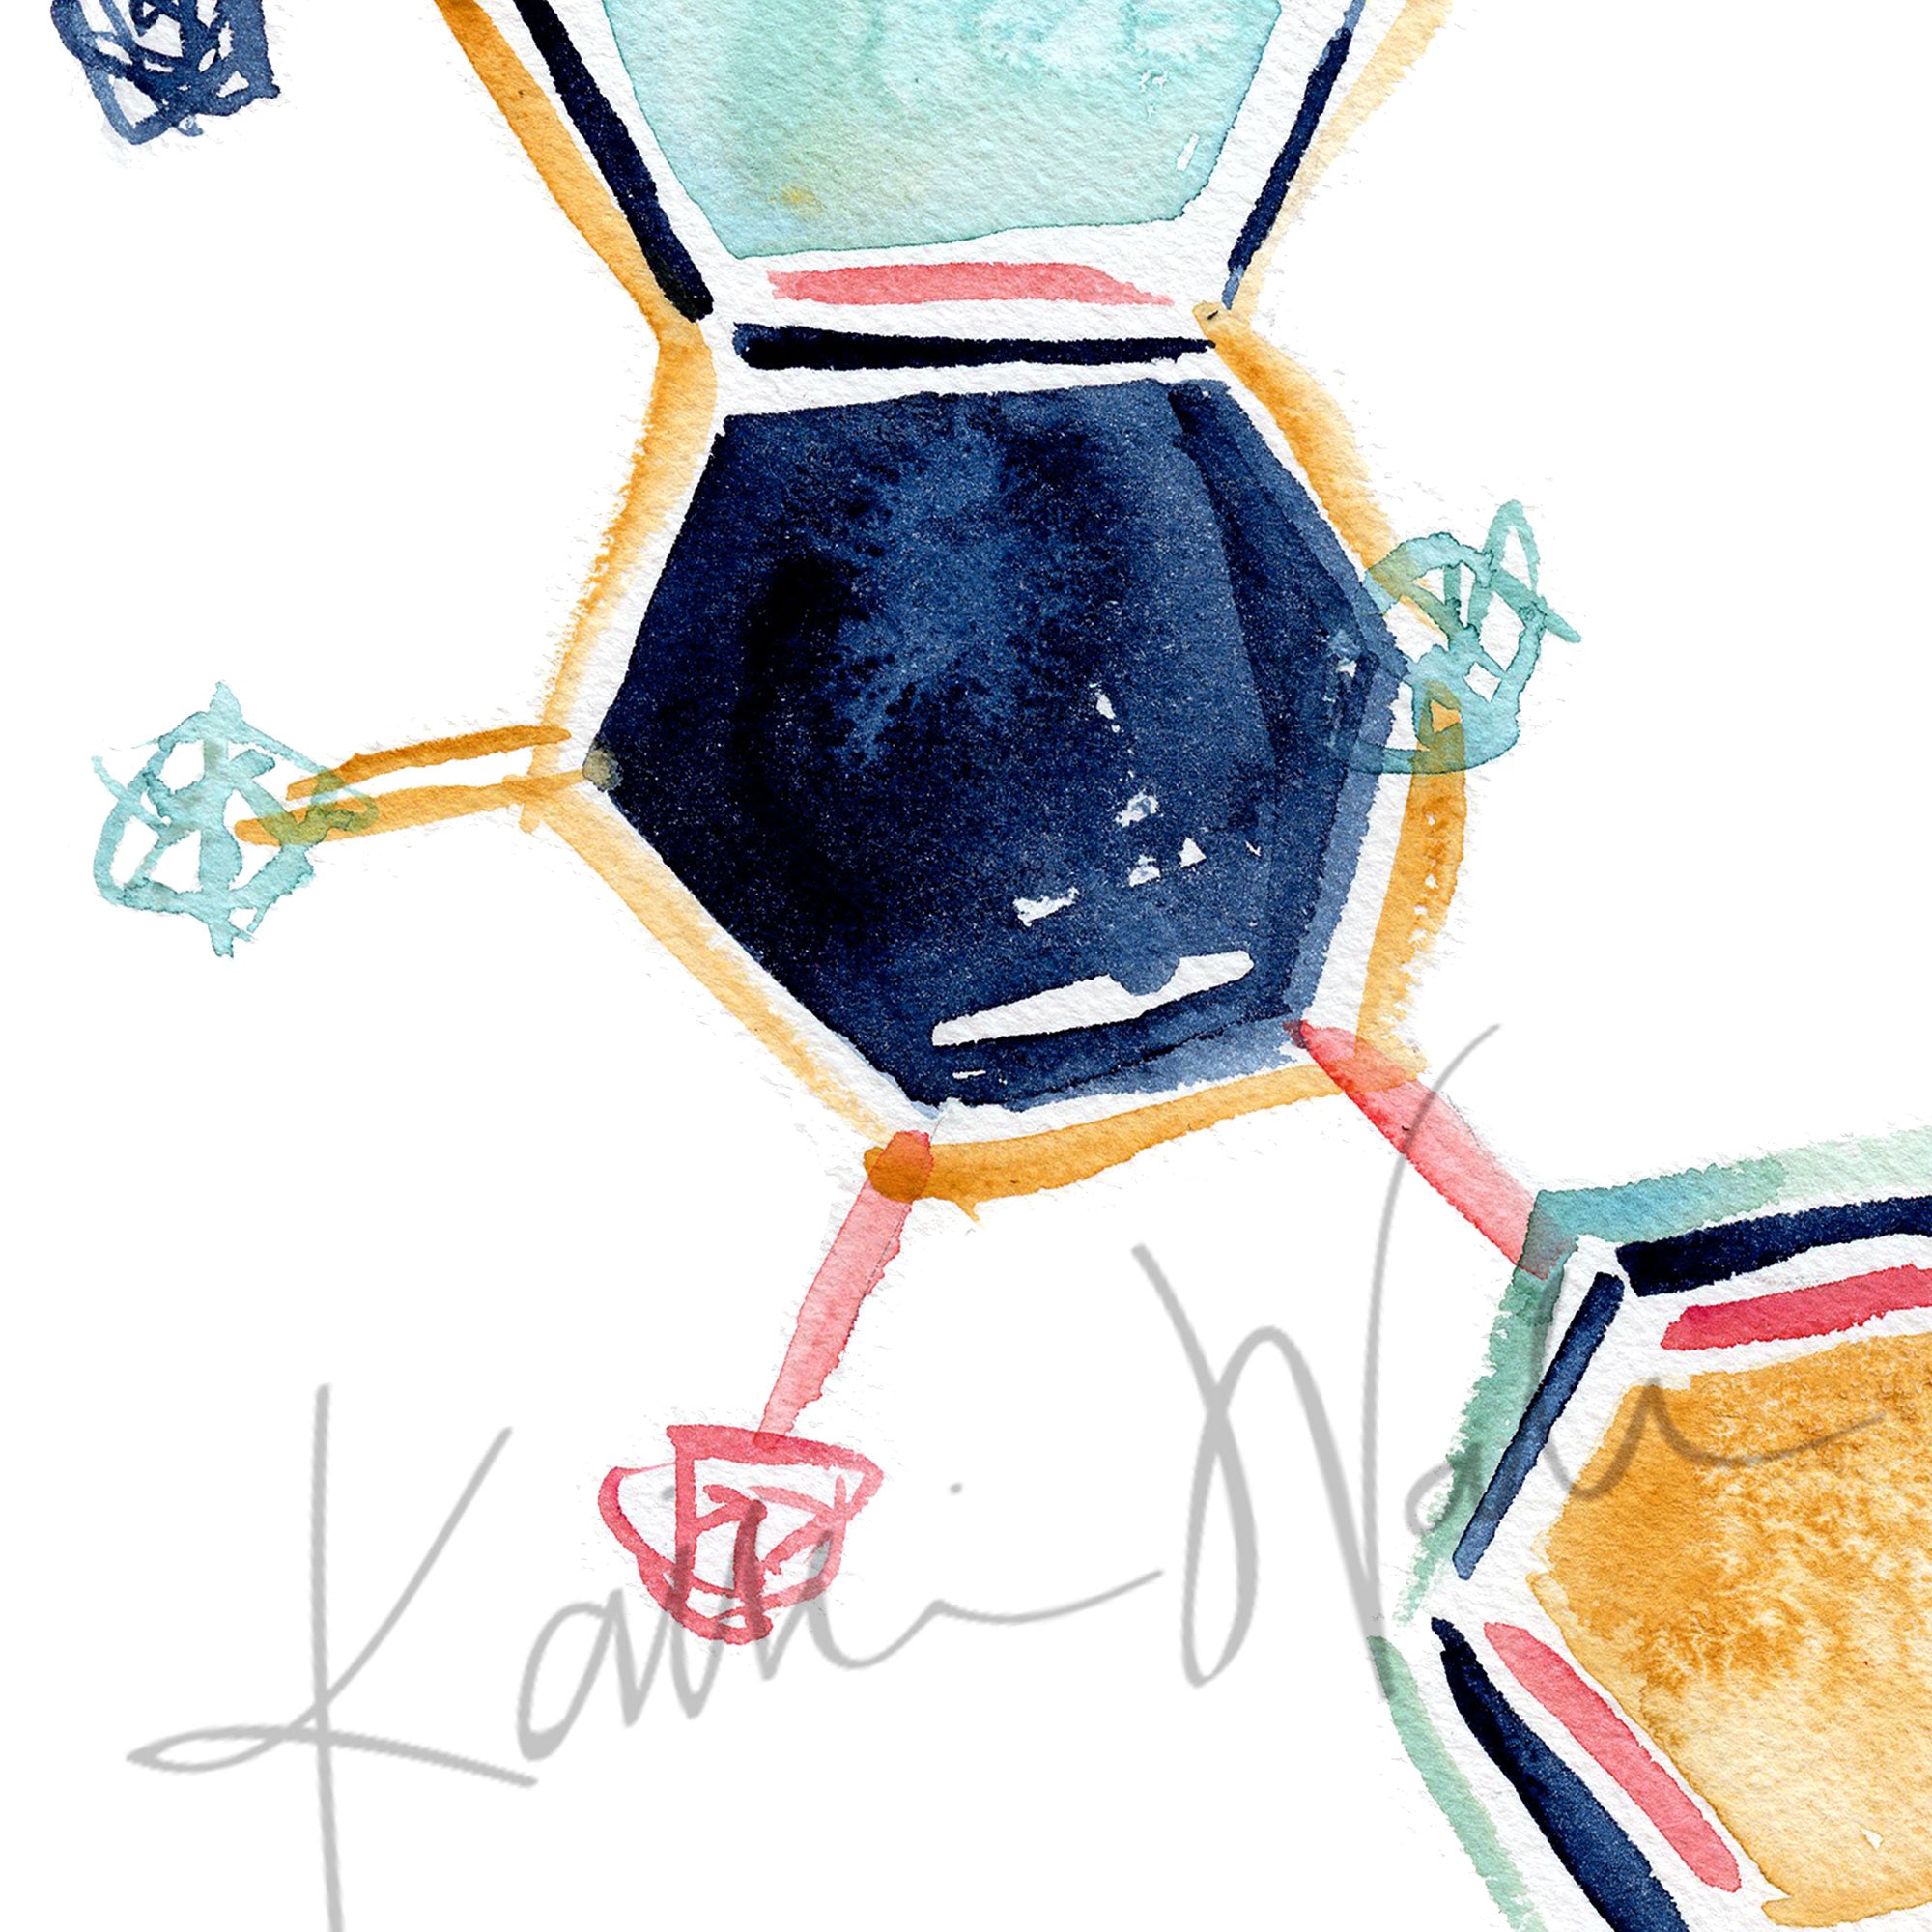 Zoomed in view of a watercolor painting of prolactin hormone molecular structure.